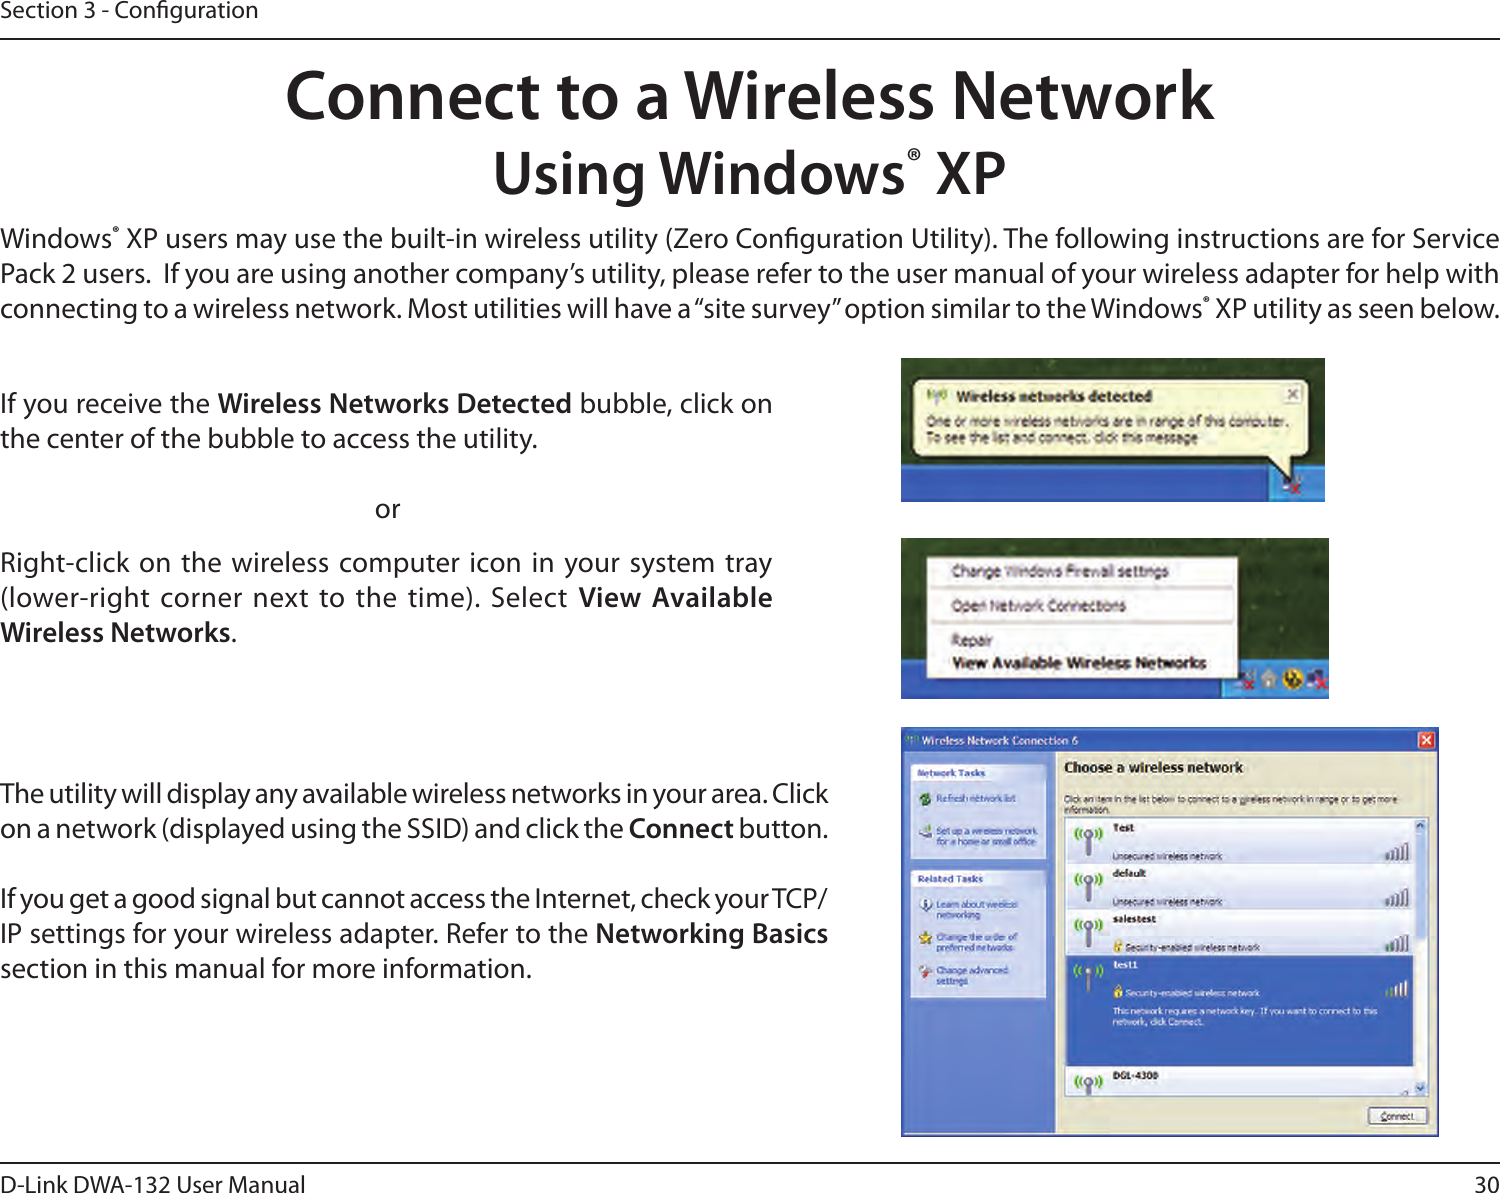 30D-Link DWA-132 User ManualSection 3 - CongurationConnect to a Wireless NetworkUsing Windows® XPWindows® XP users may use the built-in wireless utility (Zero Conguration Utility). The following instructions are for Service Pack 2 users.  If you are using another company’s utility, please refer to the user manual of your wireless adapter for help with connecting to a wireless network. Most utilities will have a “site survey” option similar to the Windows® XP utility as seen below.Right-click on  the  wireless computer icon in  your system tray (lower-right corner next to the time). Select  View Available Wireless Networks.If you receive the Wireless Networks Detected bubble, click on the center of the bubble to access the utility.     orThe utility will display any available wireless networks in your area. Click on a network (displayed using the SSID) and click the Connect button.If you get a good signal but cannot access the Internet, check your TCP/IP settings for your wireless adapter. Refer to the Networking Basics section in this manual for more information.